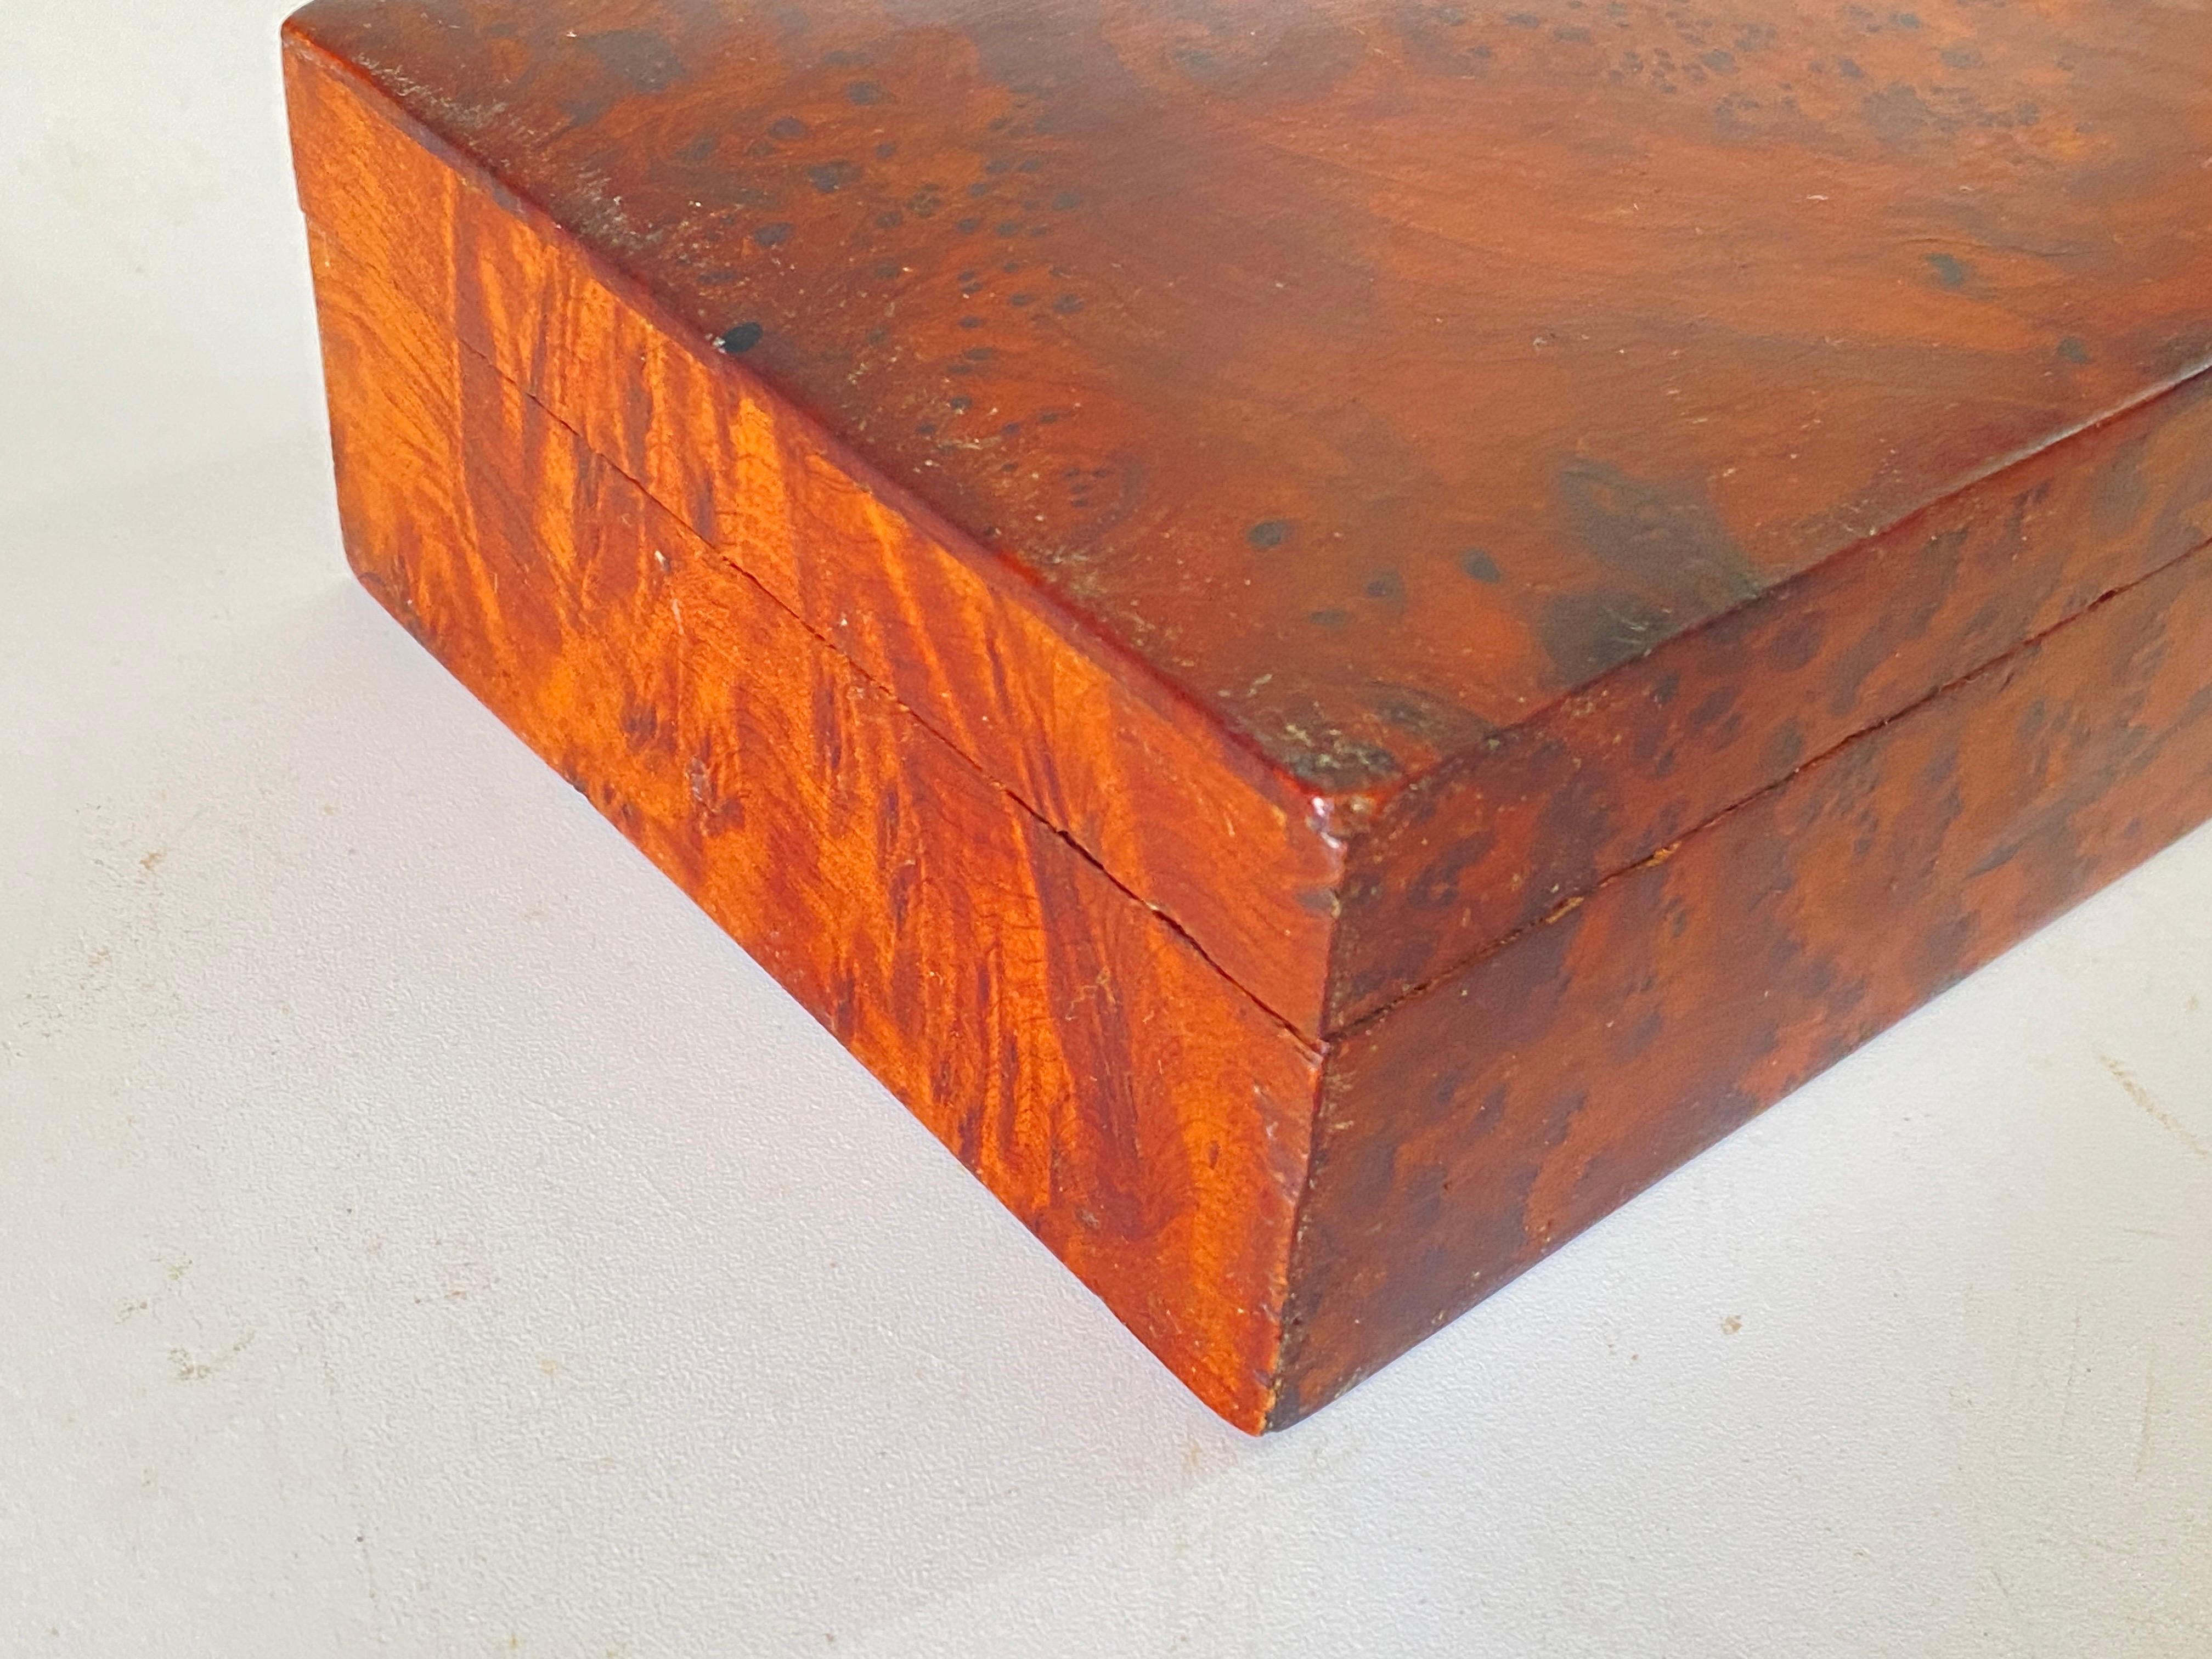 Hollywood Regency Cigar Box or Decorative Box in Burled Wood, Brown Color, France, 20th Century For Sale